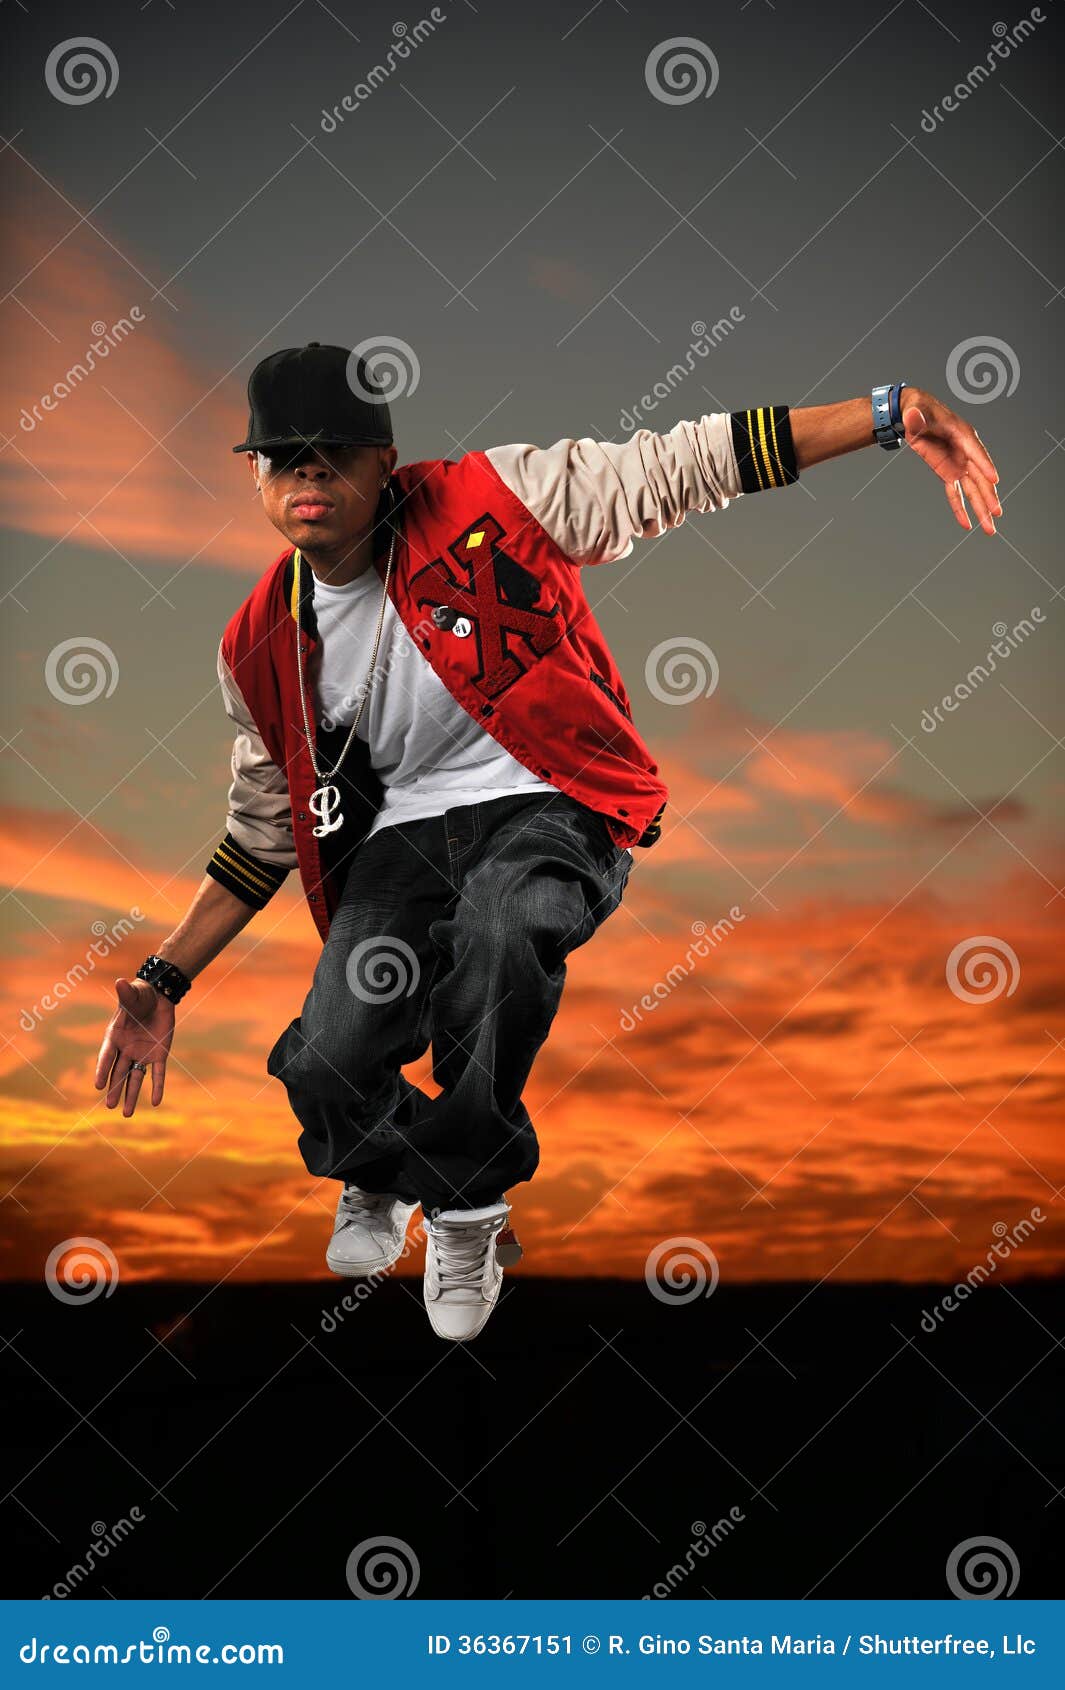 Free: Side view of mid-air pose by hip hop dancer Free Photo - nohat.cc